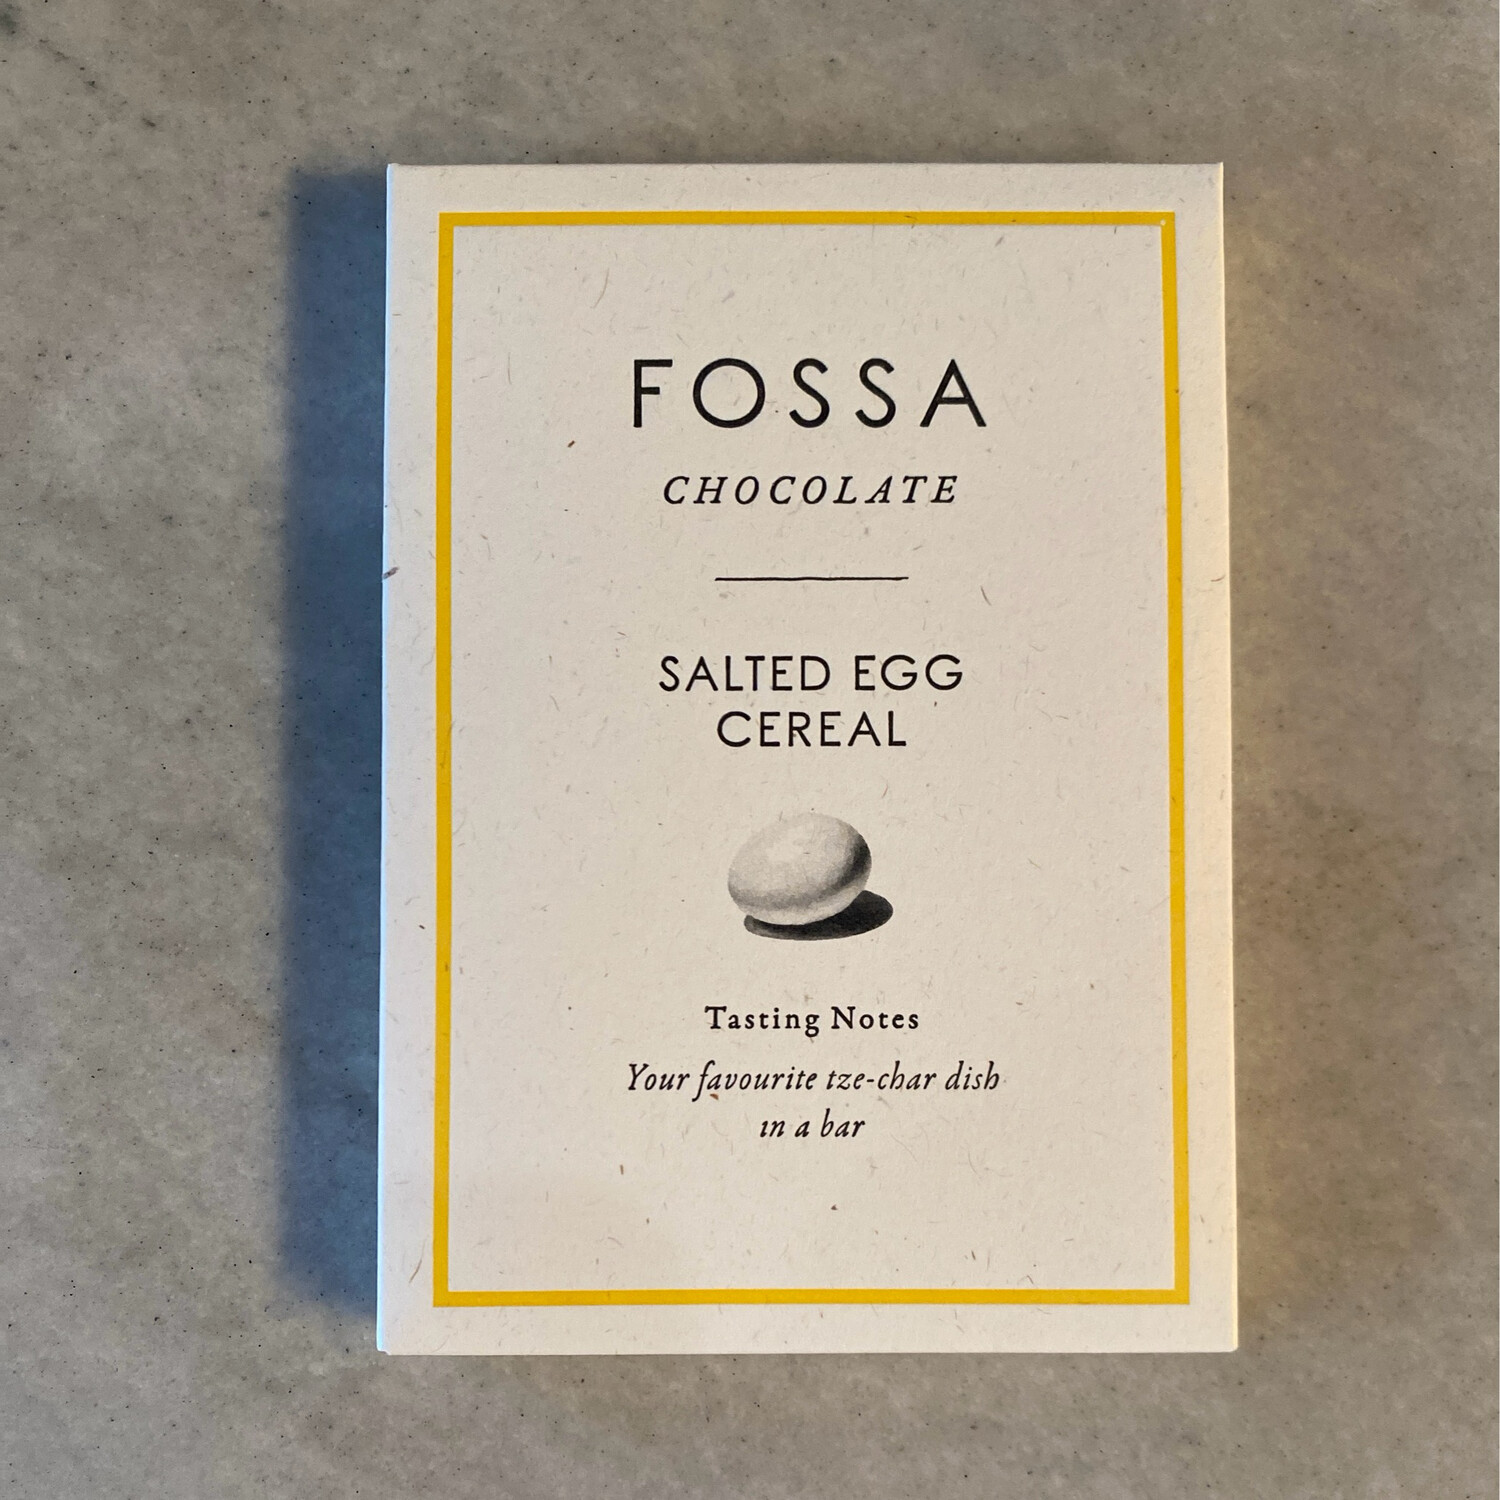 Fossa Salted Egg Cereal Blond Chocolate